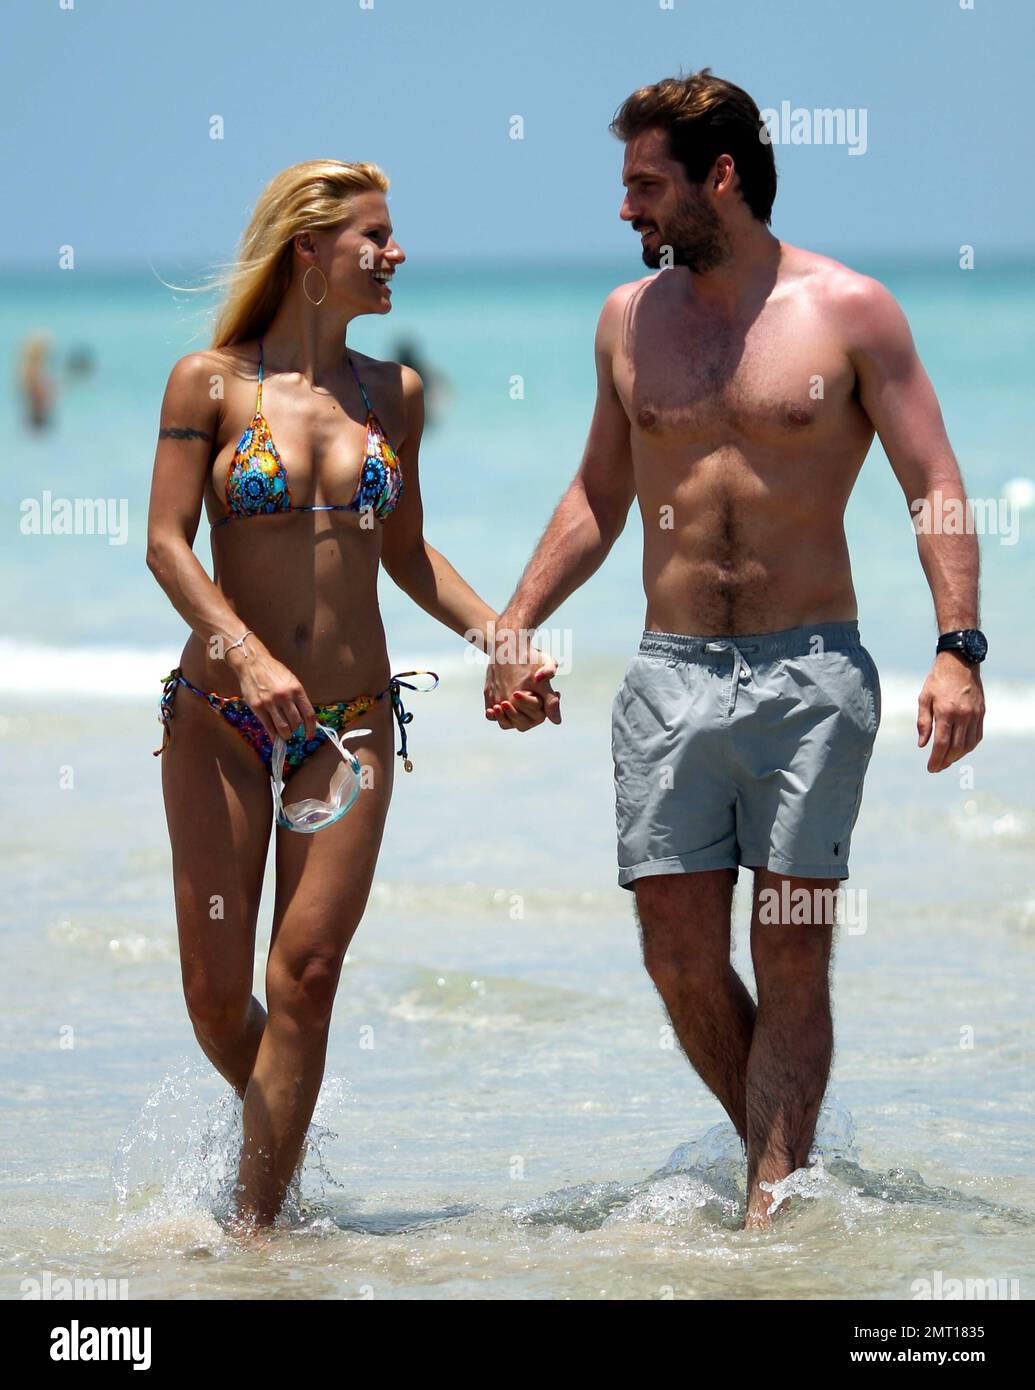 Swiss TV host and actress Michelle Hunziker spends the day in Miami Beach with boyfriend Tomaso Trussardi. 35 year old Hunziker wore a multi-color string bikini that showed off her amazing toned figure. The couple were seen taking a dip in the ocean and happily walking hand-in-hand. Miami Beach, FL. 3rd June 2012. . Stock Photo